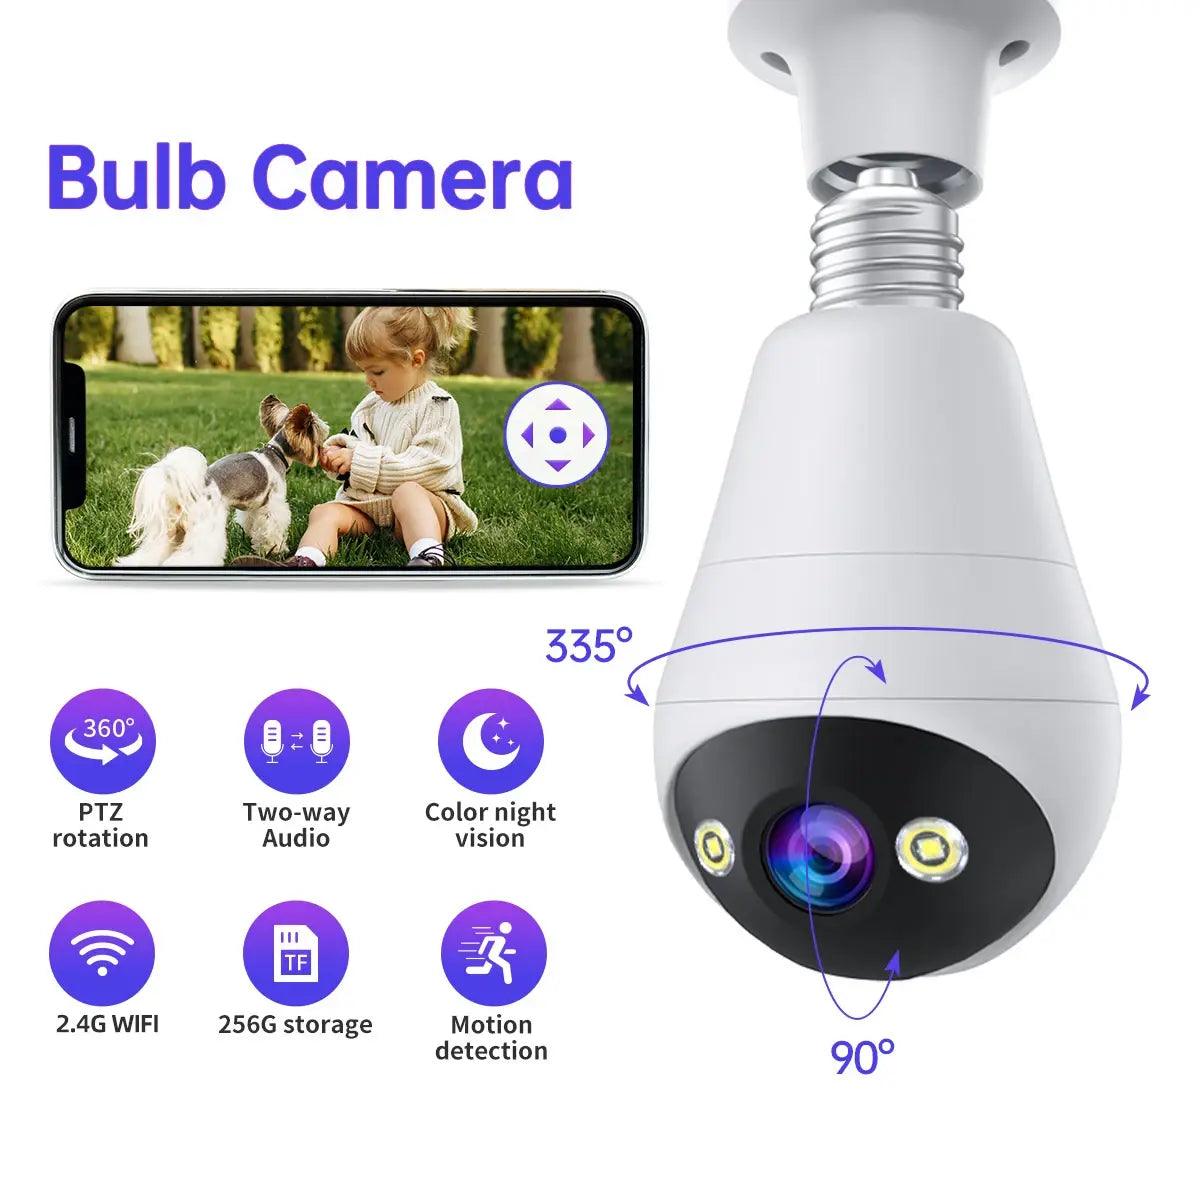 WiFi Bulb Camera with Night Vision - ACO Marketplace